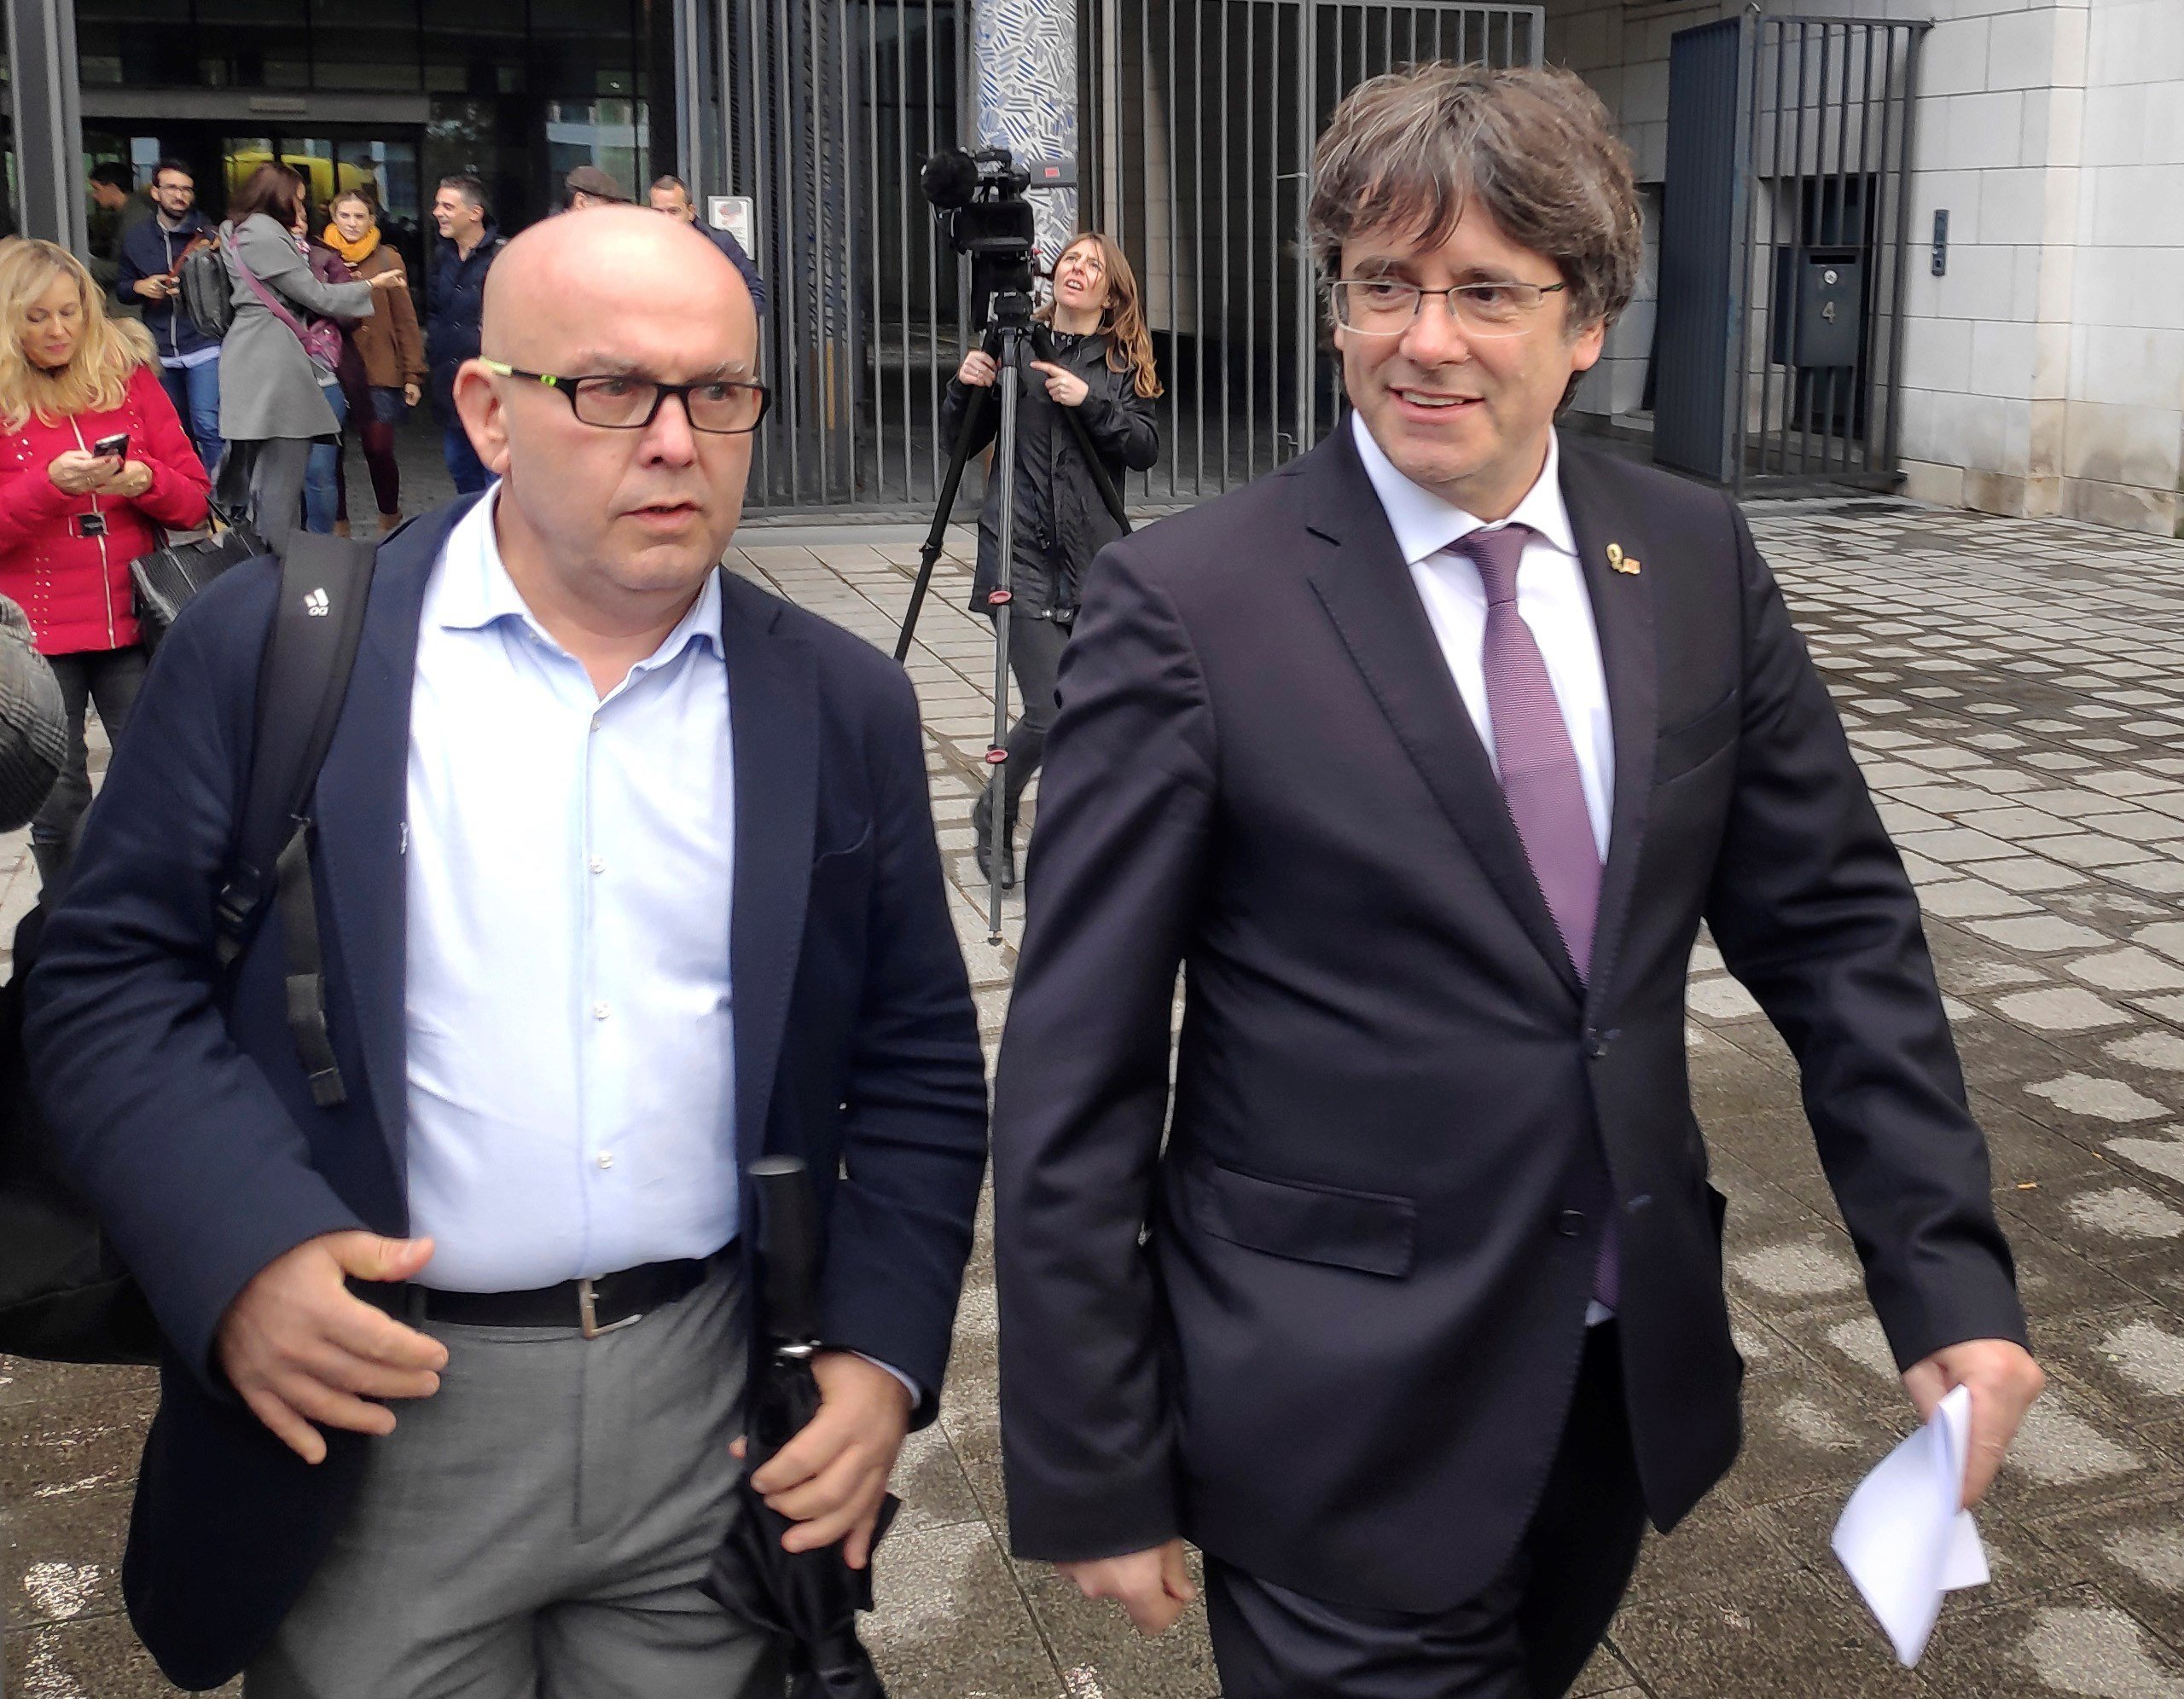 Puigdemont challenges Llarena and urges him to consult the CJEU